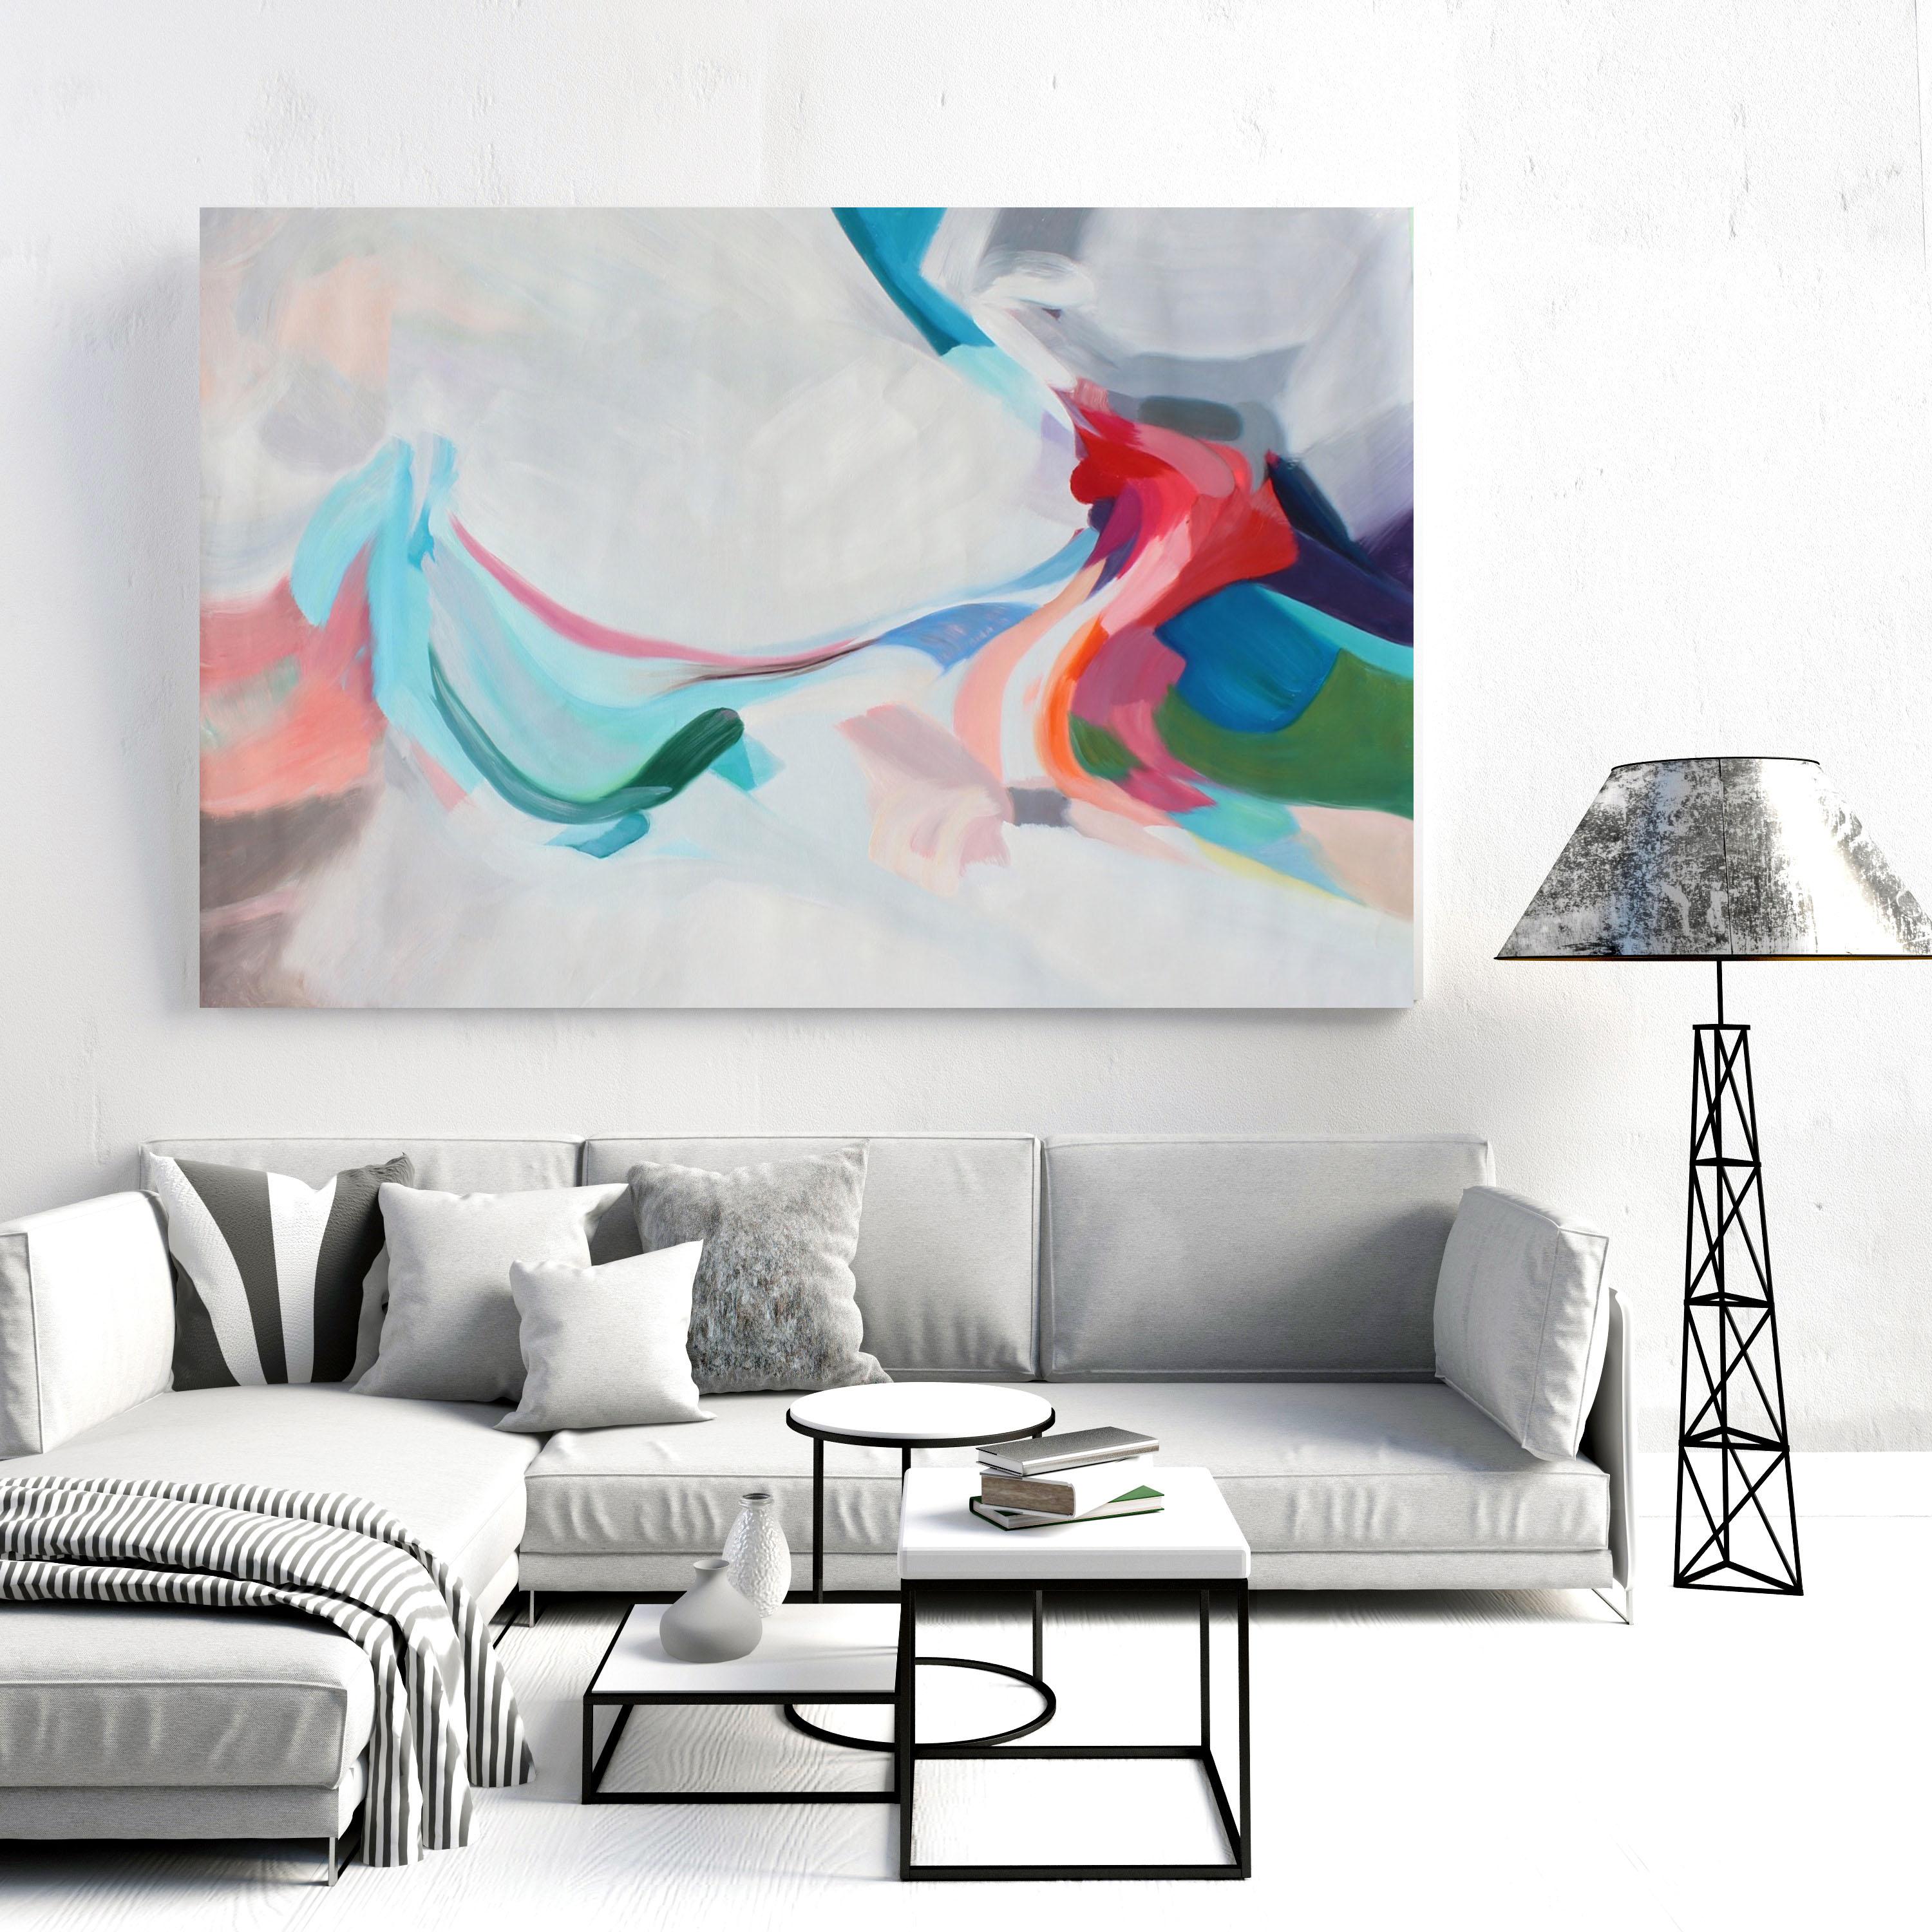 Irena Orlov Abstract Painting - Red Blue Contemporary Acrylic Painting on Canvas 68" X 42", Moments of Reality